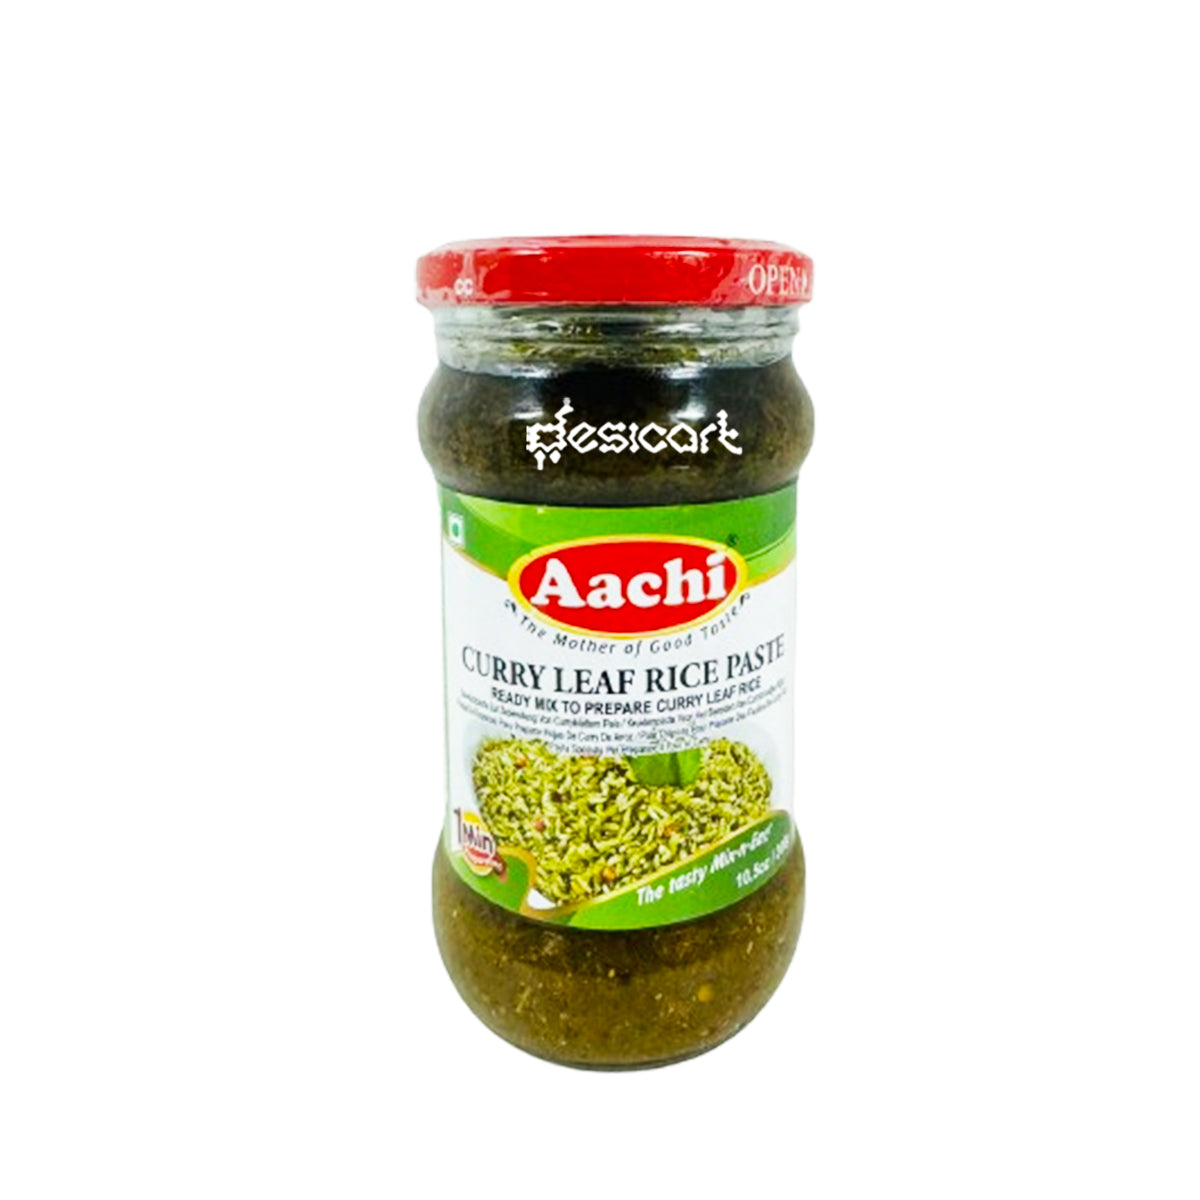 Aachi Curry Leaf Paste 300g